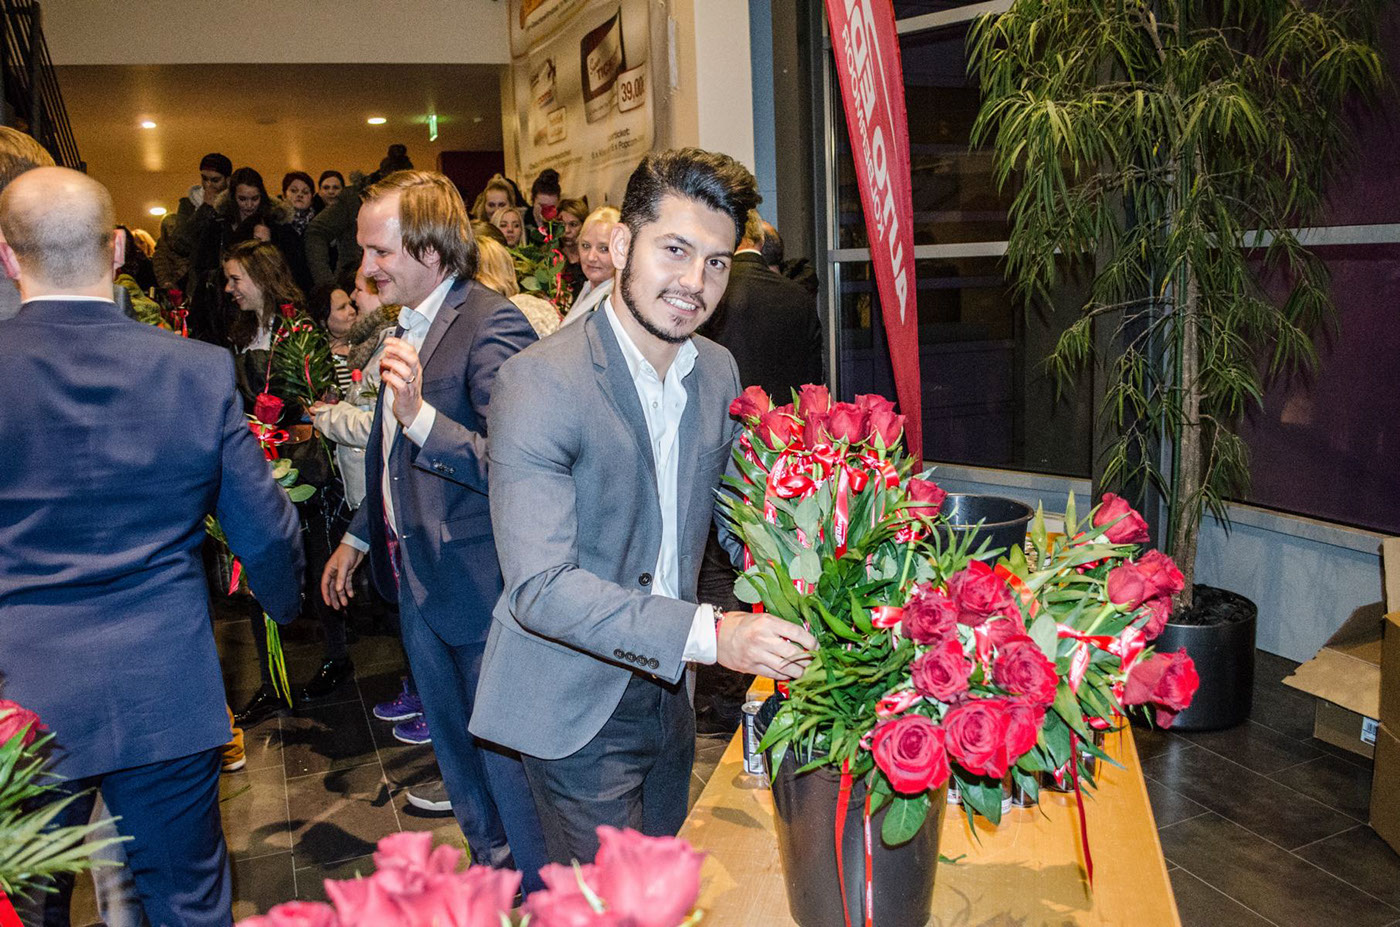 Event kino Film   fifty shades of grey bachelor valentinstag Vip roter Teppich